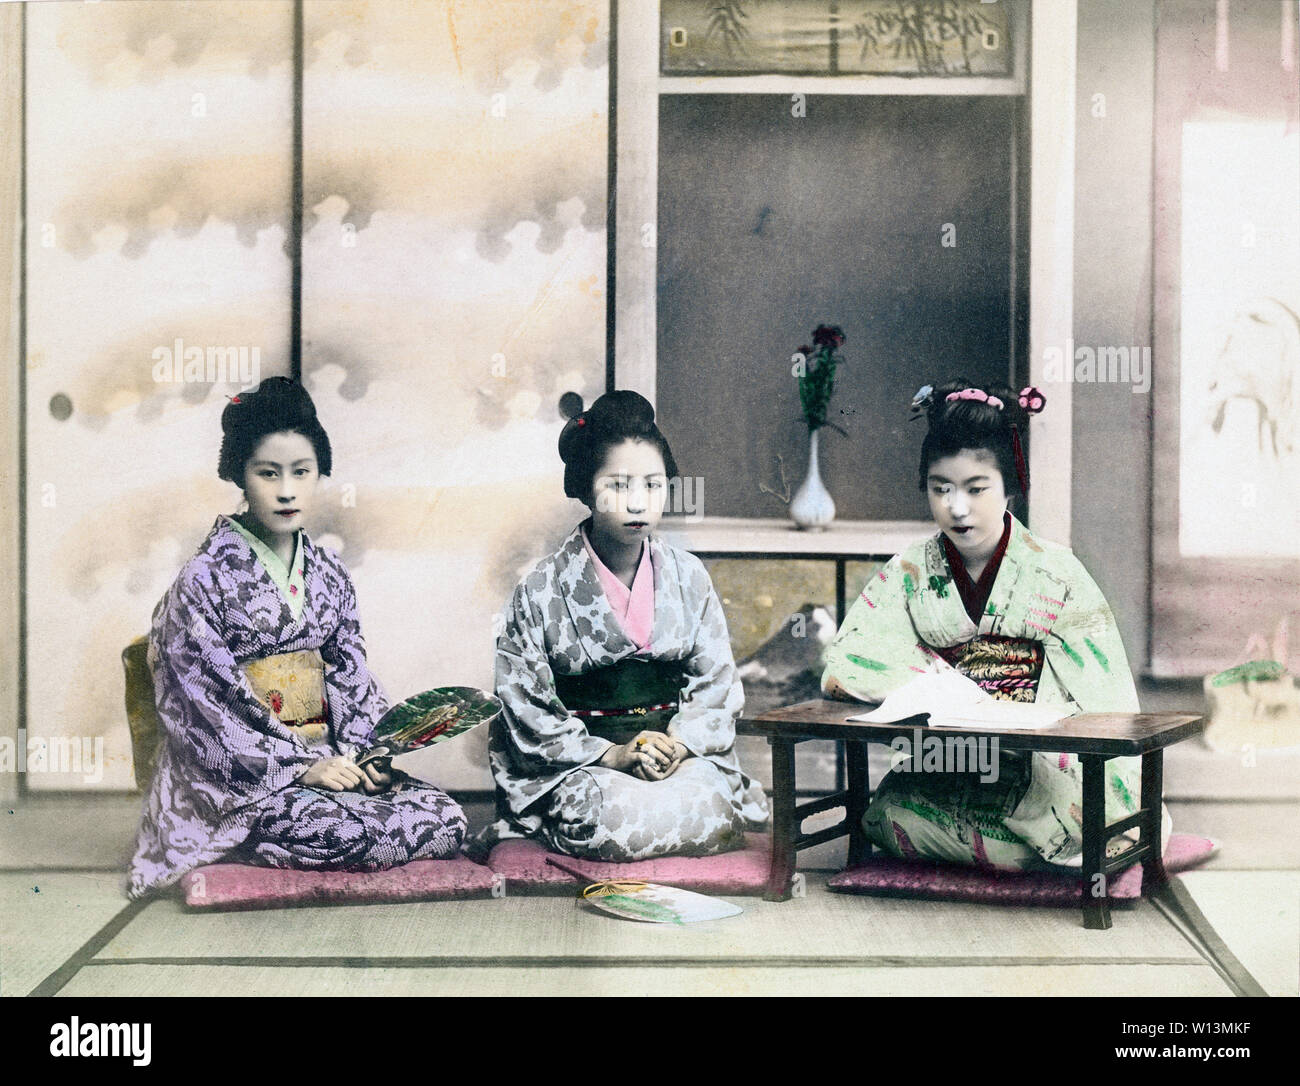 1890s Japan - Japanese Women Singing ] — Three women in kimono and with  traditional hairstyle study singing in a Japanese room with tatami  (rice-straw mats). 19th century vintage albumen photograph